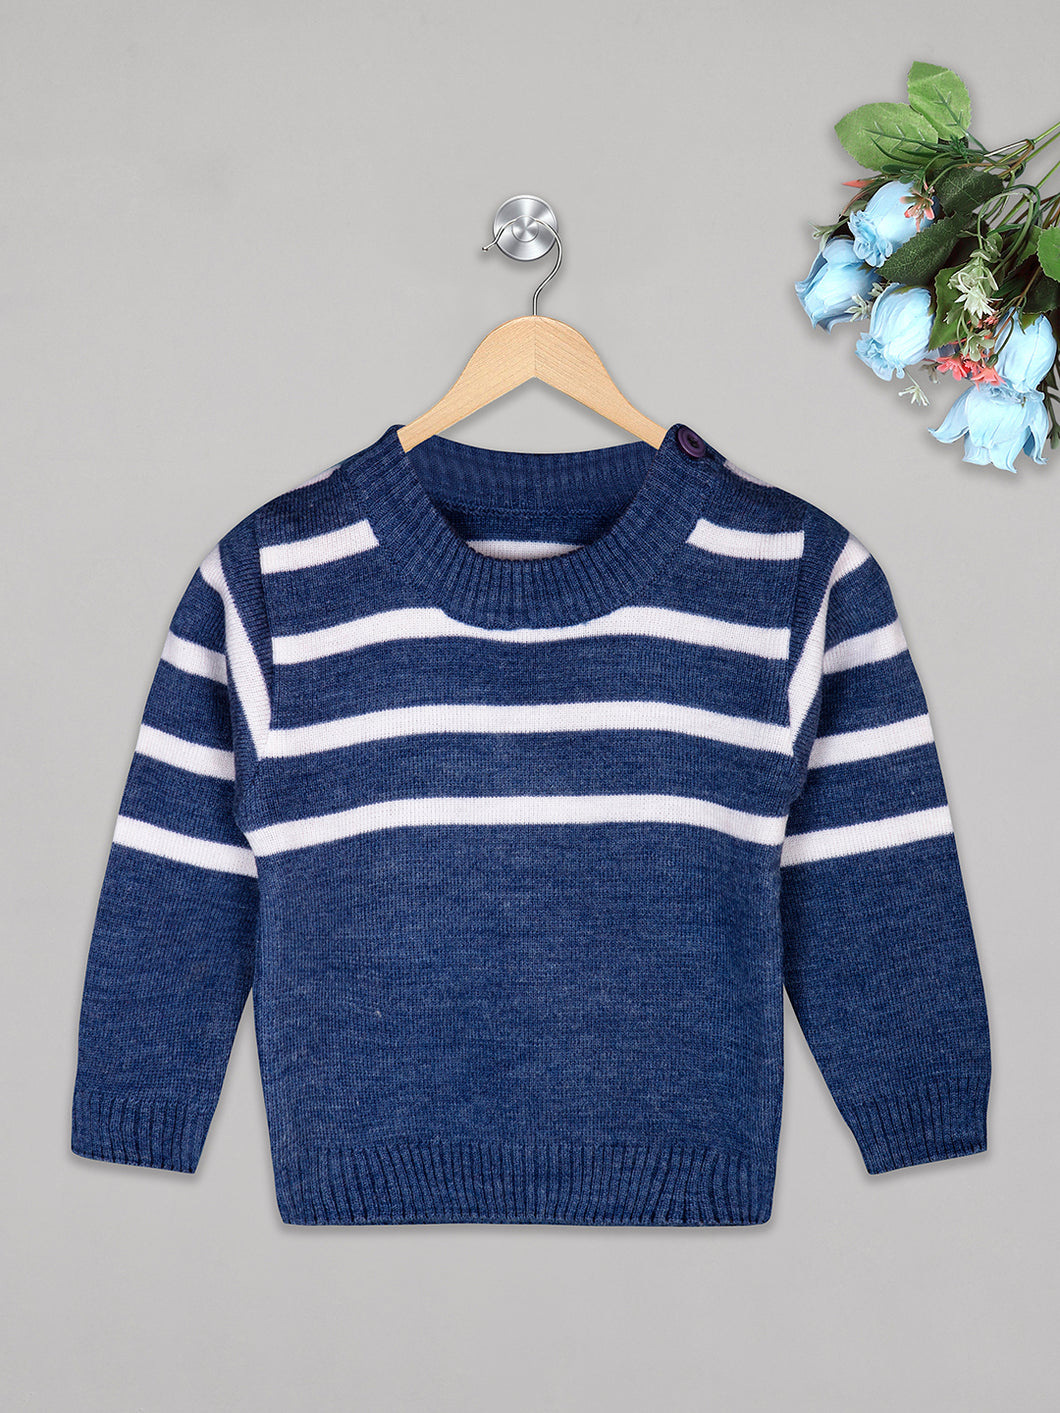 Boys winter woolen full sleeves round neck stripes sweater in navy and white combination